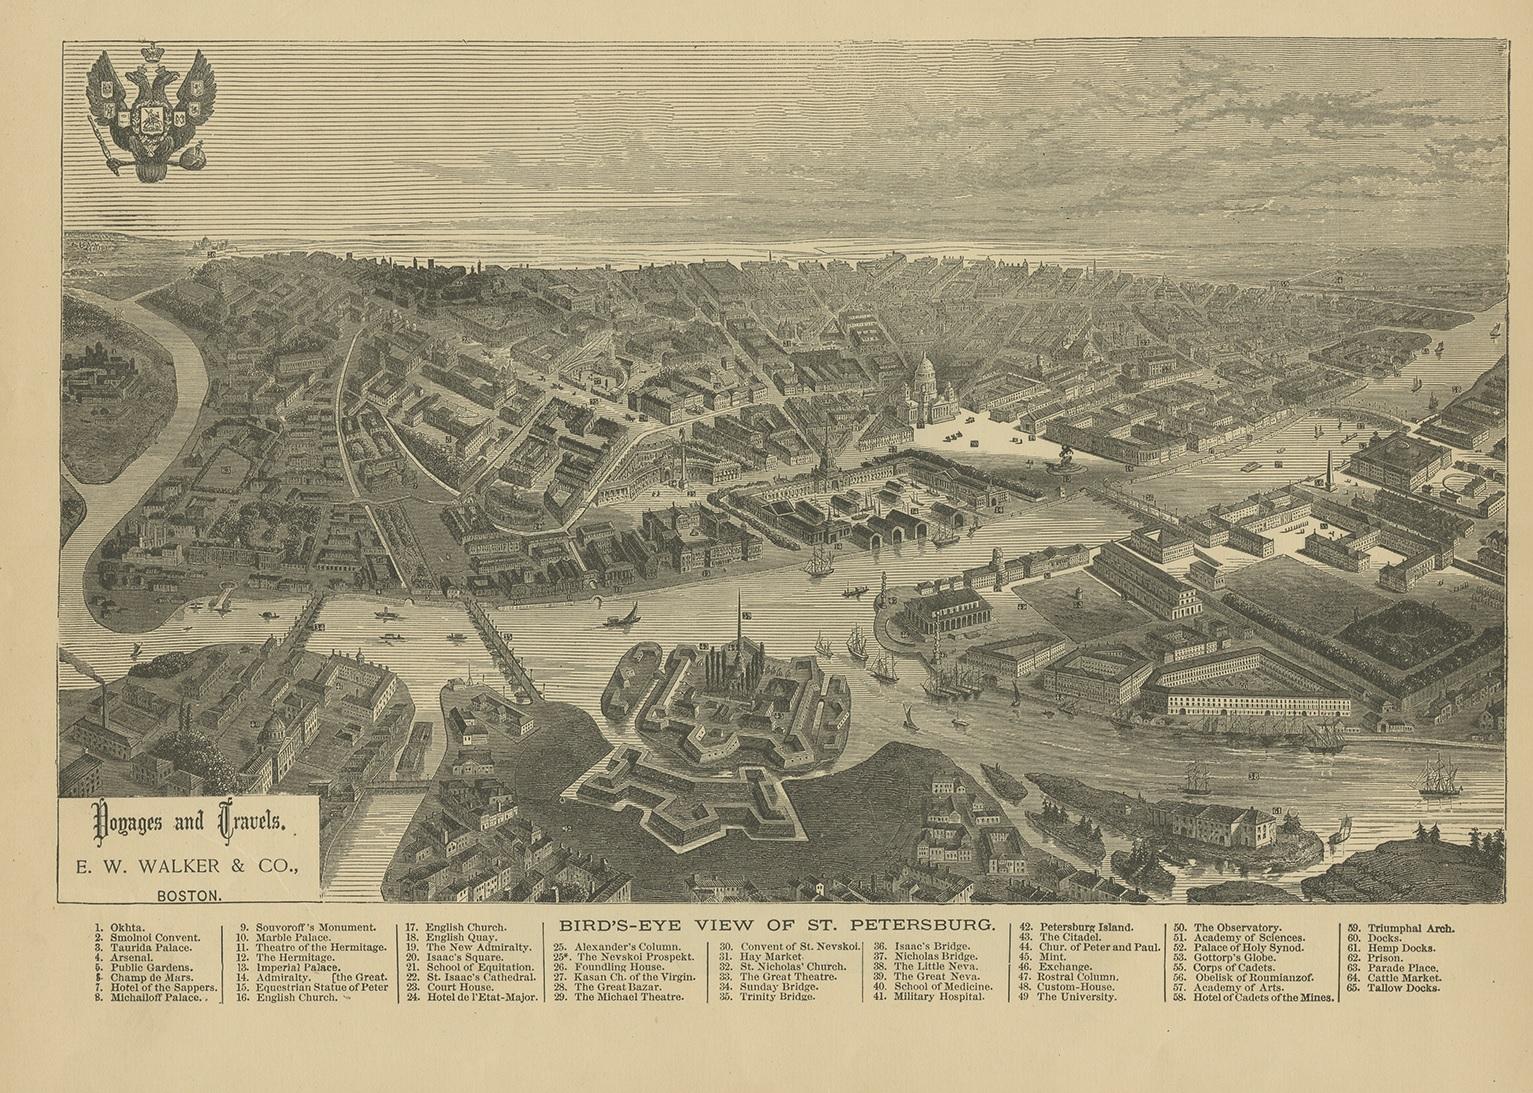 Antique print titled 'Bird’s-Eye View of St. Petersburg'. Old print with a view of Saint Petersburg, Russia. Originates from 'Voyages and Travels'. Published by E.W. Walker & Co, Boston.